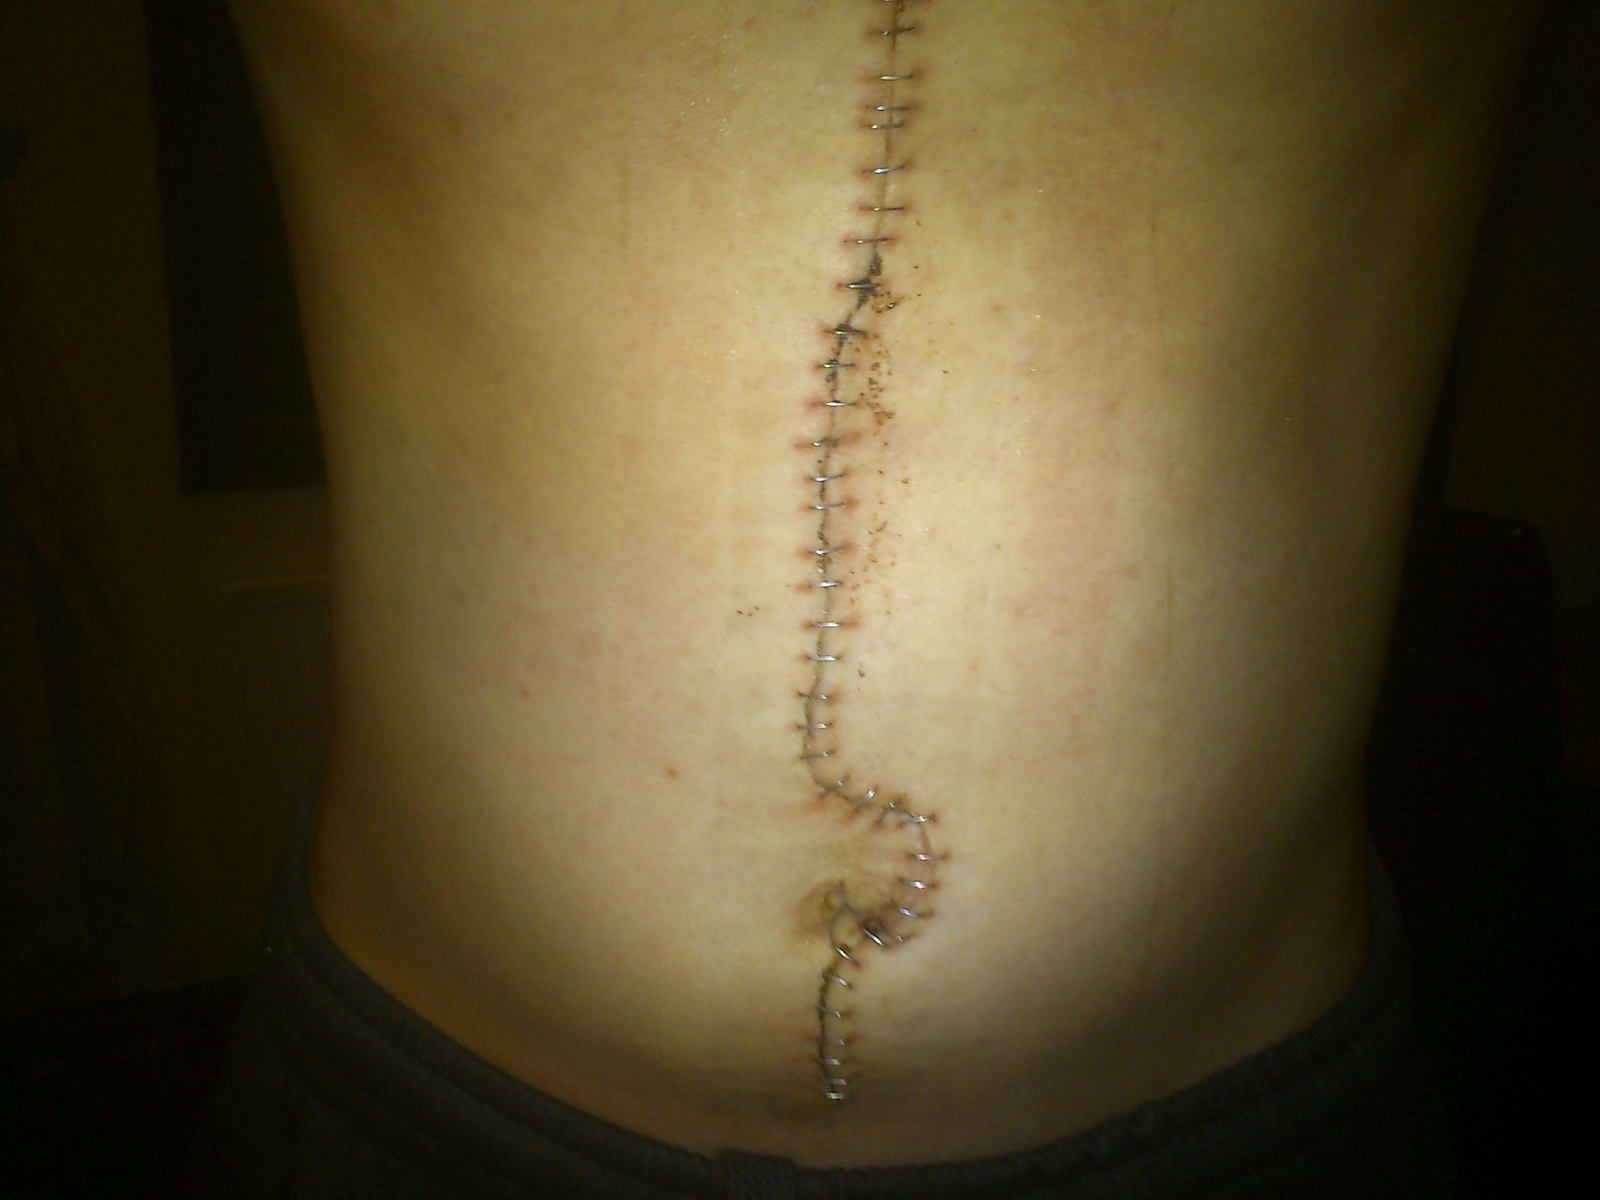 1 week after surgery.
reson for surgery = cancer